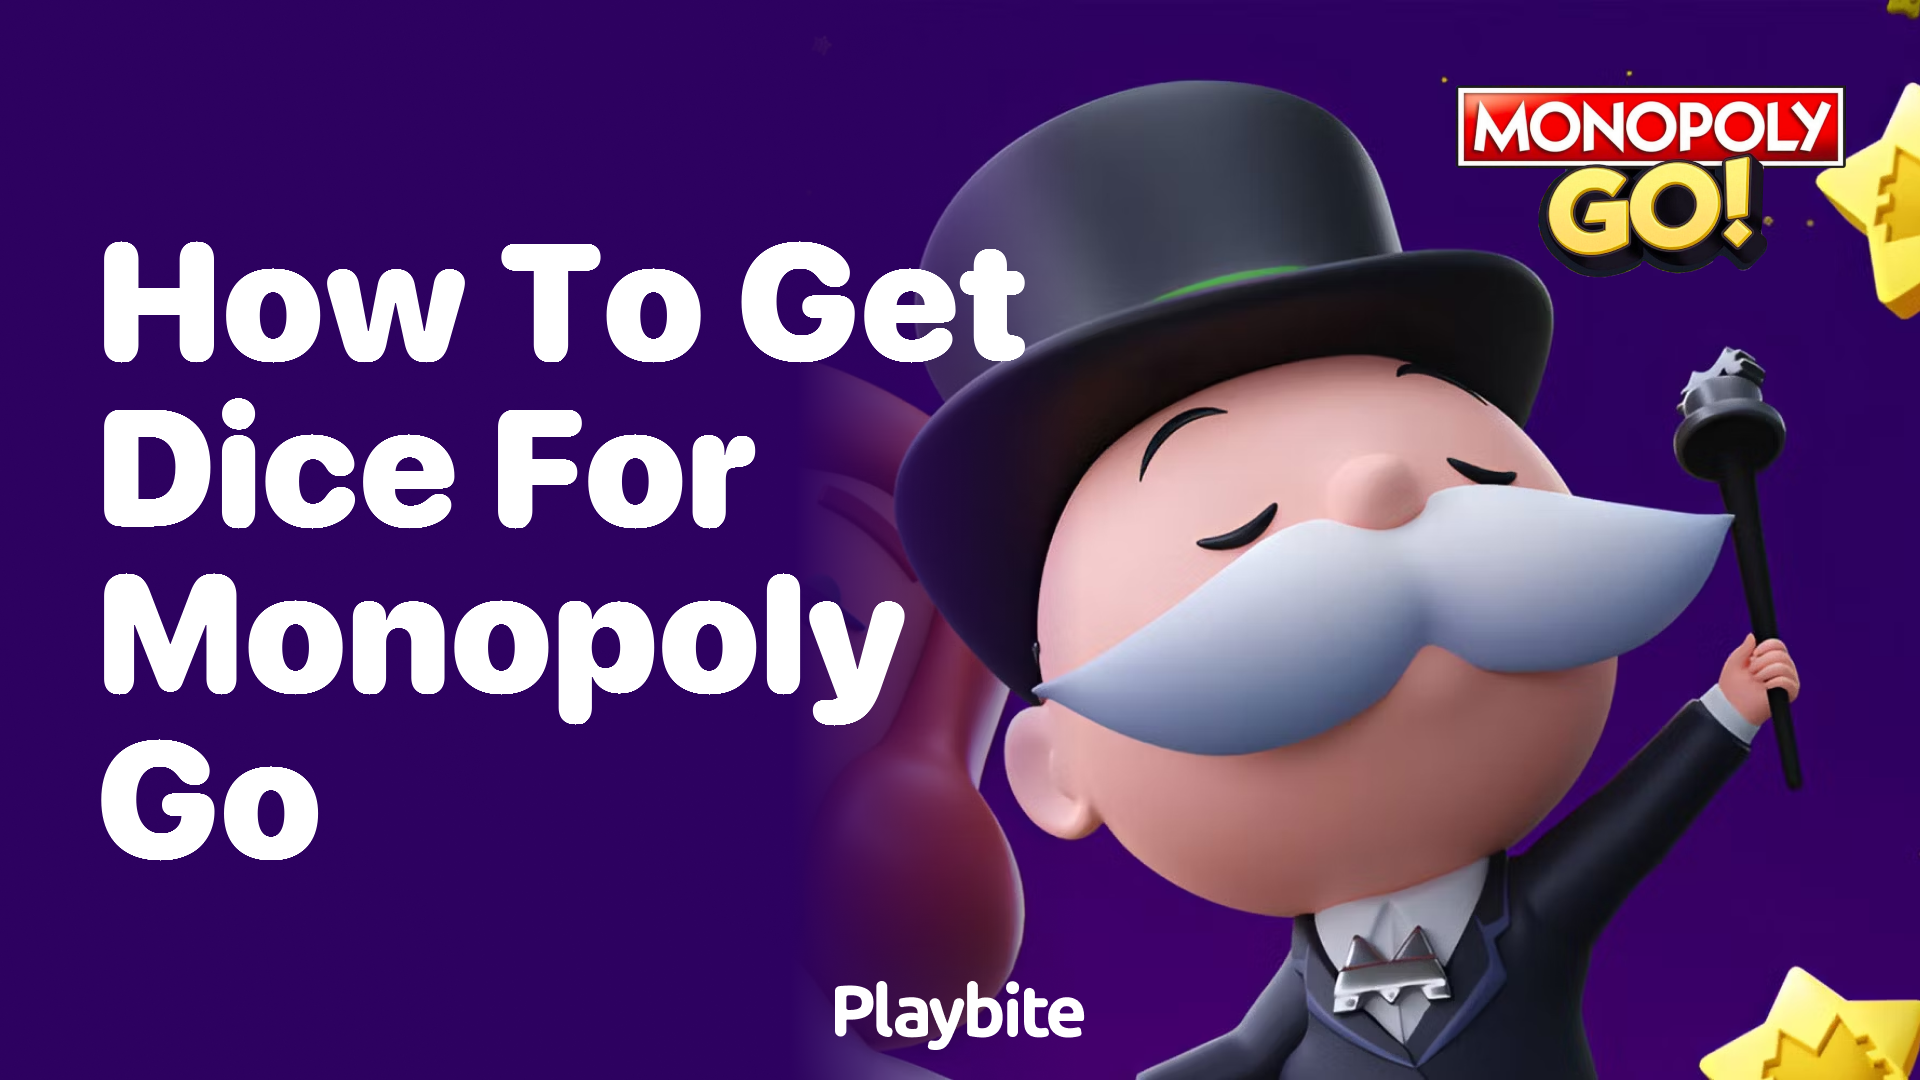 How to Get Dice for Monopoly Go: A Quick Guide